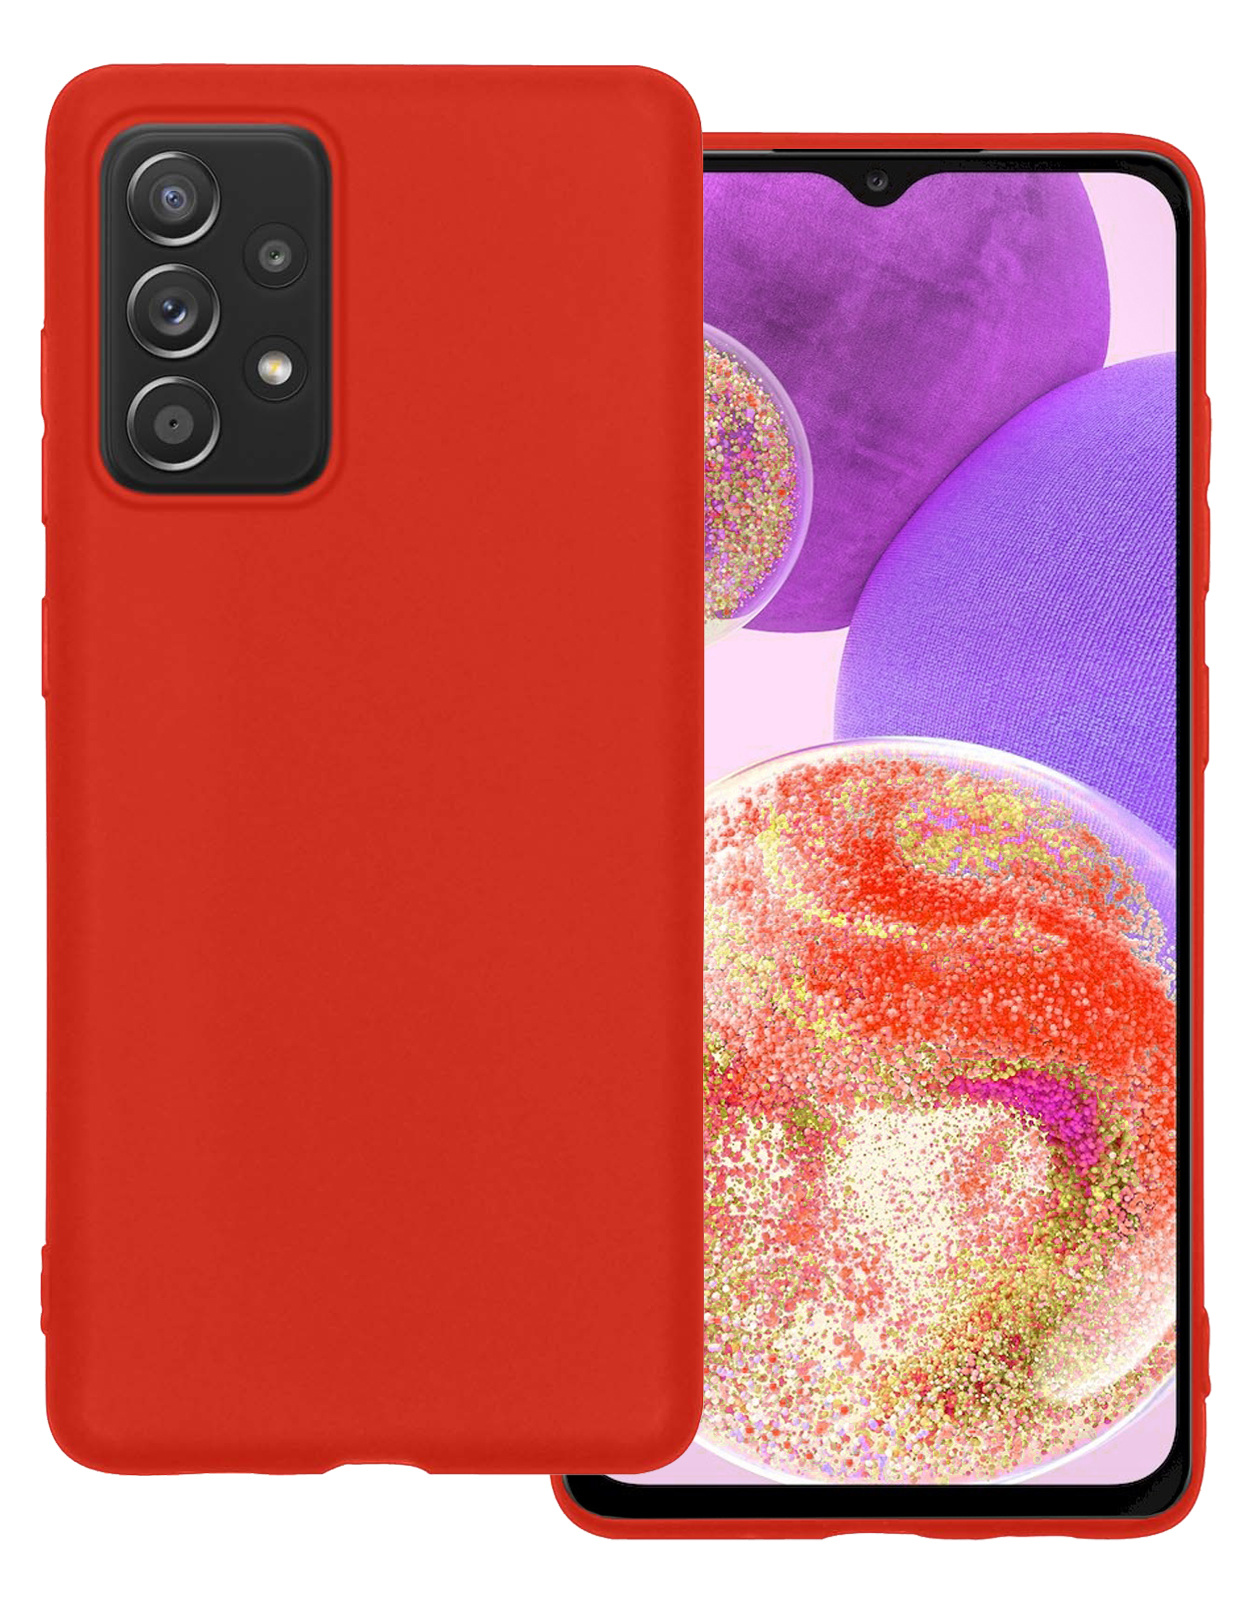 BASEY. Hoes Geschikt voor Samsung A23 Hoesje Siliconen Back Cover Case - Hoesje Geschikt voor Samsung Galaxy A23 Hoes Cover Hoesje - Rood